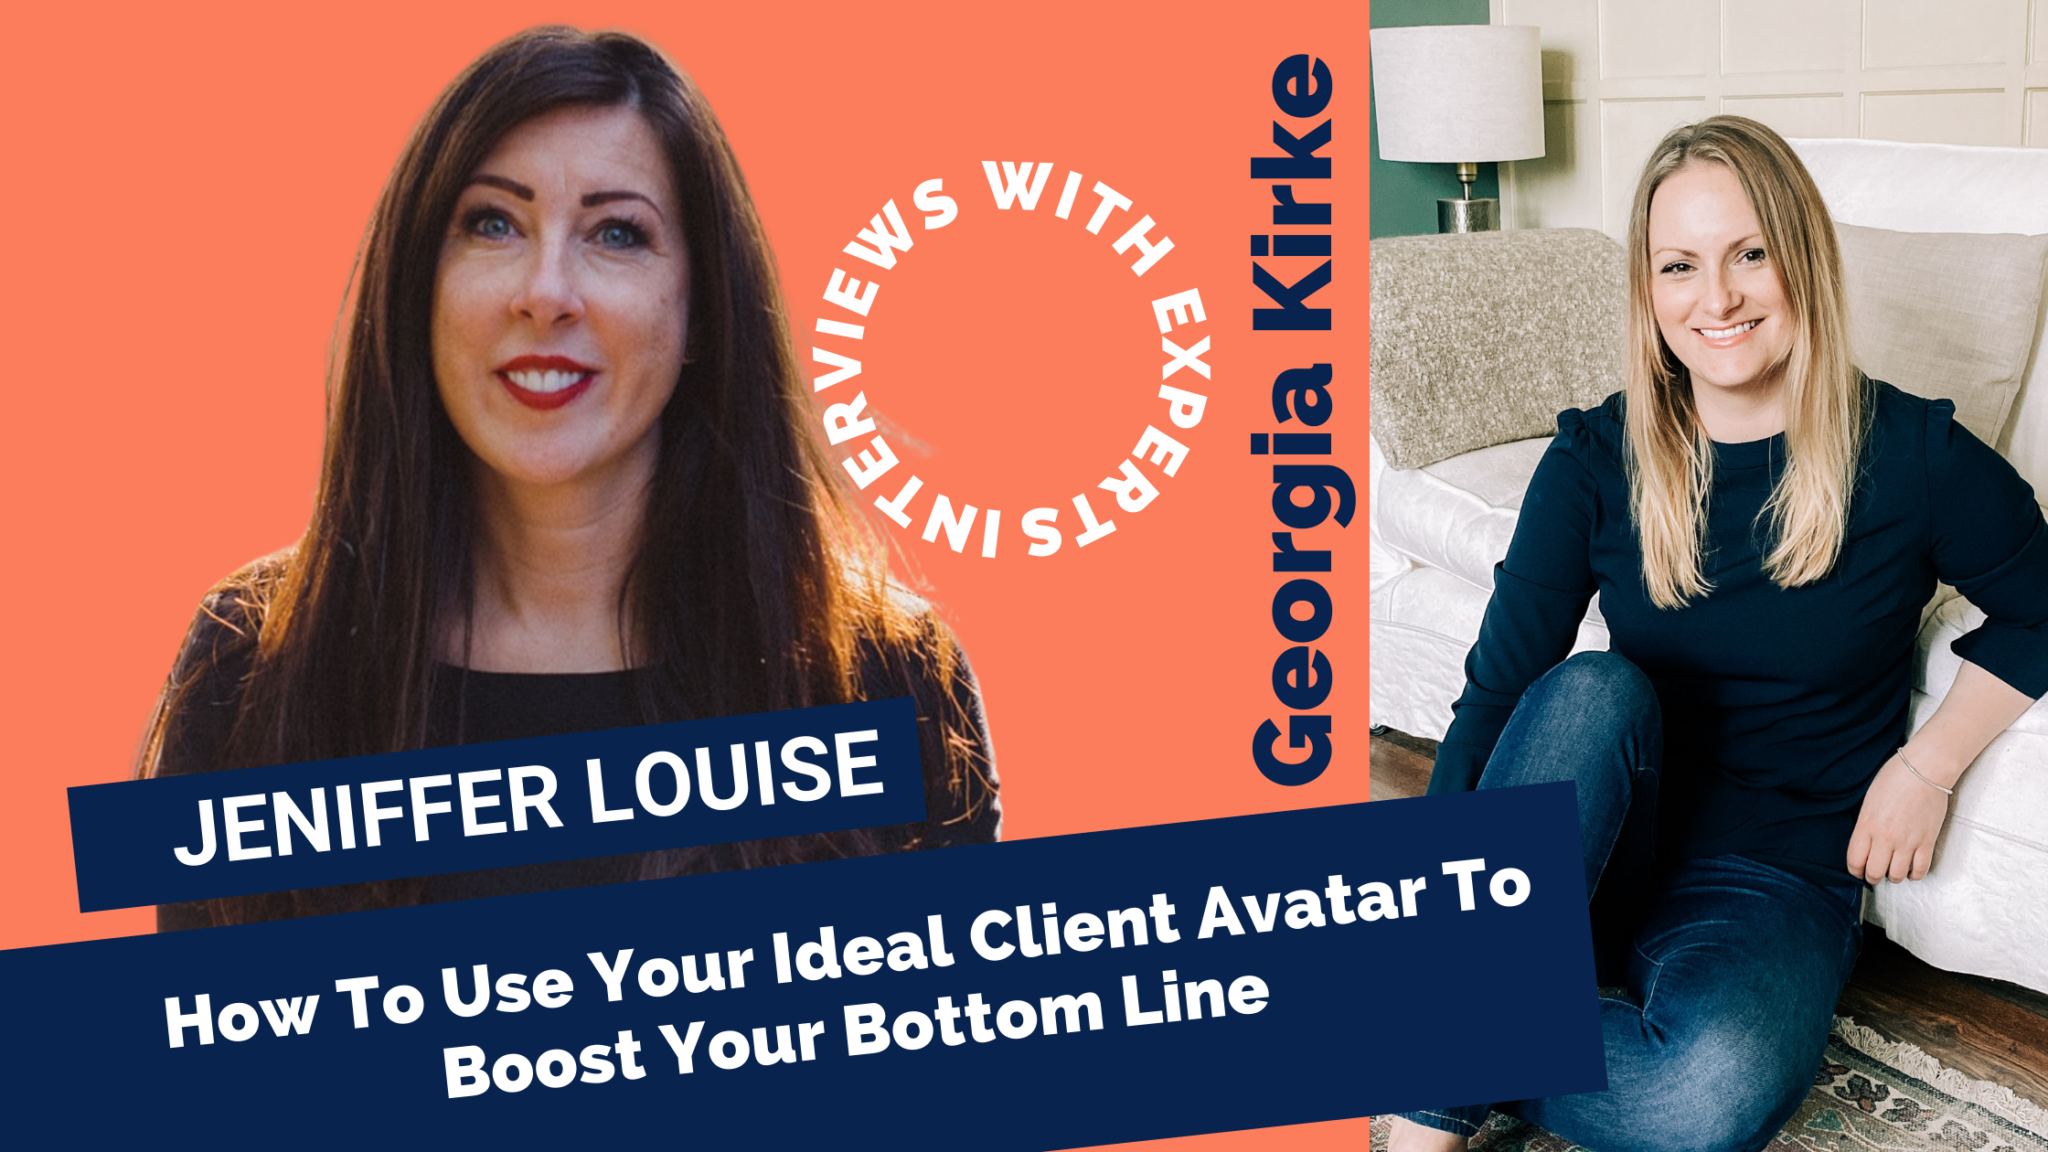 How To Use Your Ideal Client Avatar To Boost Your Bottom Line By Georgia Kirke with special guest Jennifer Louise